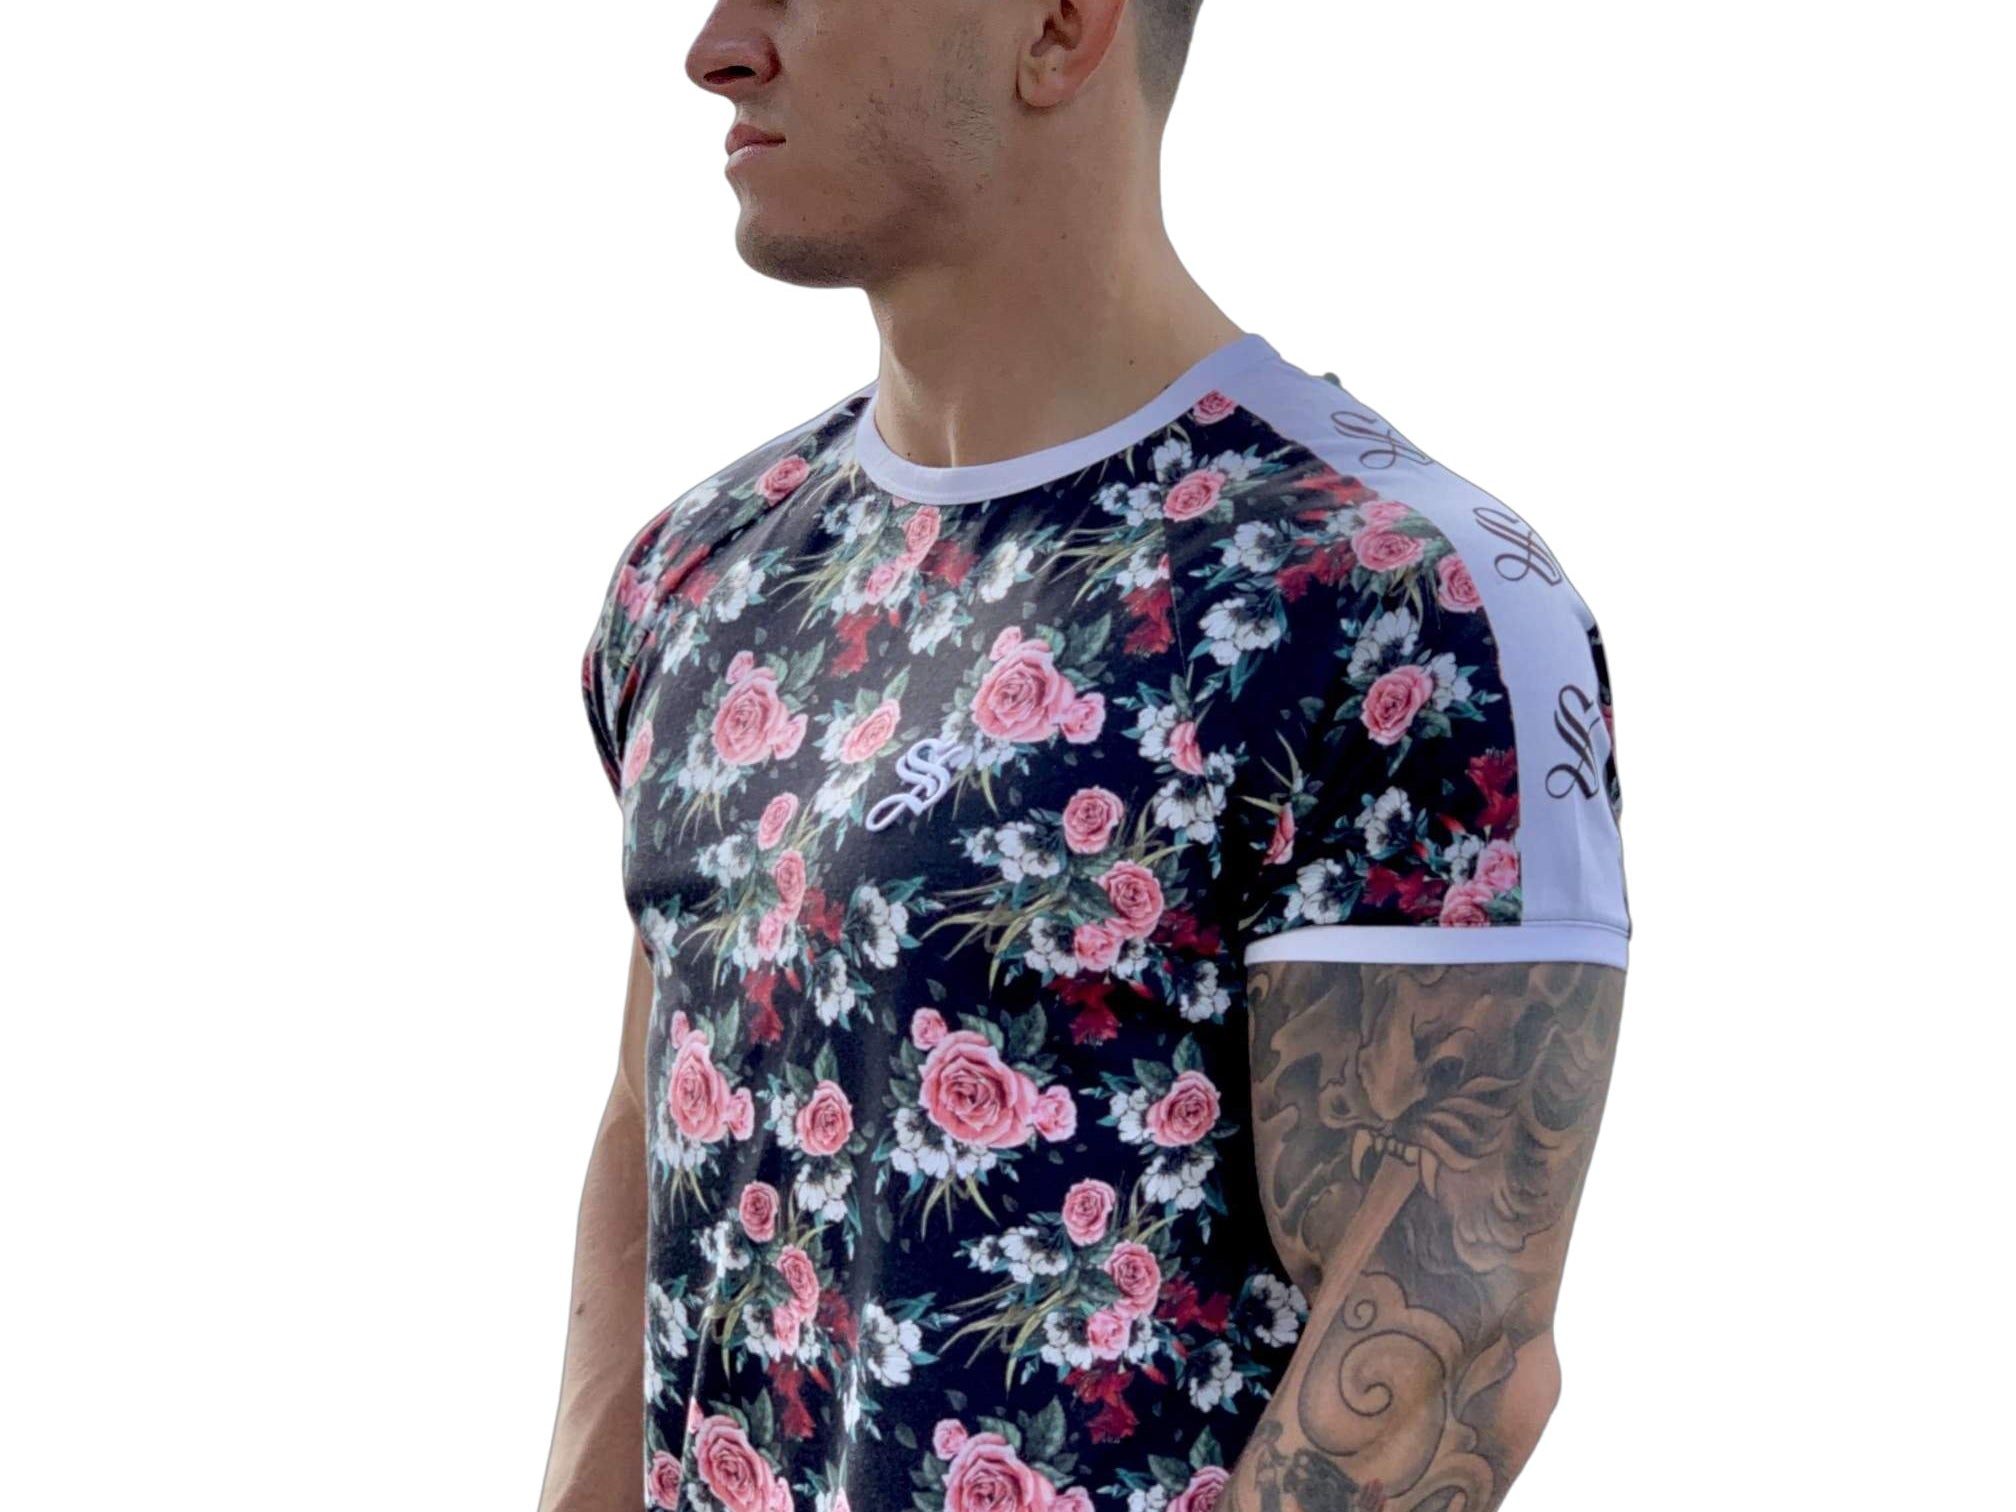 Lover Boy - Flower Design T-shirt for Men - Sarman Fashion - Wholesale Clothing Fashion Brand for Men from Canada